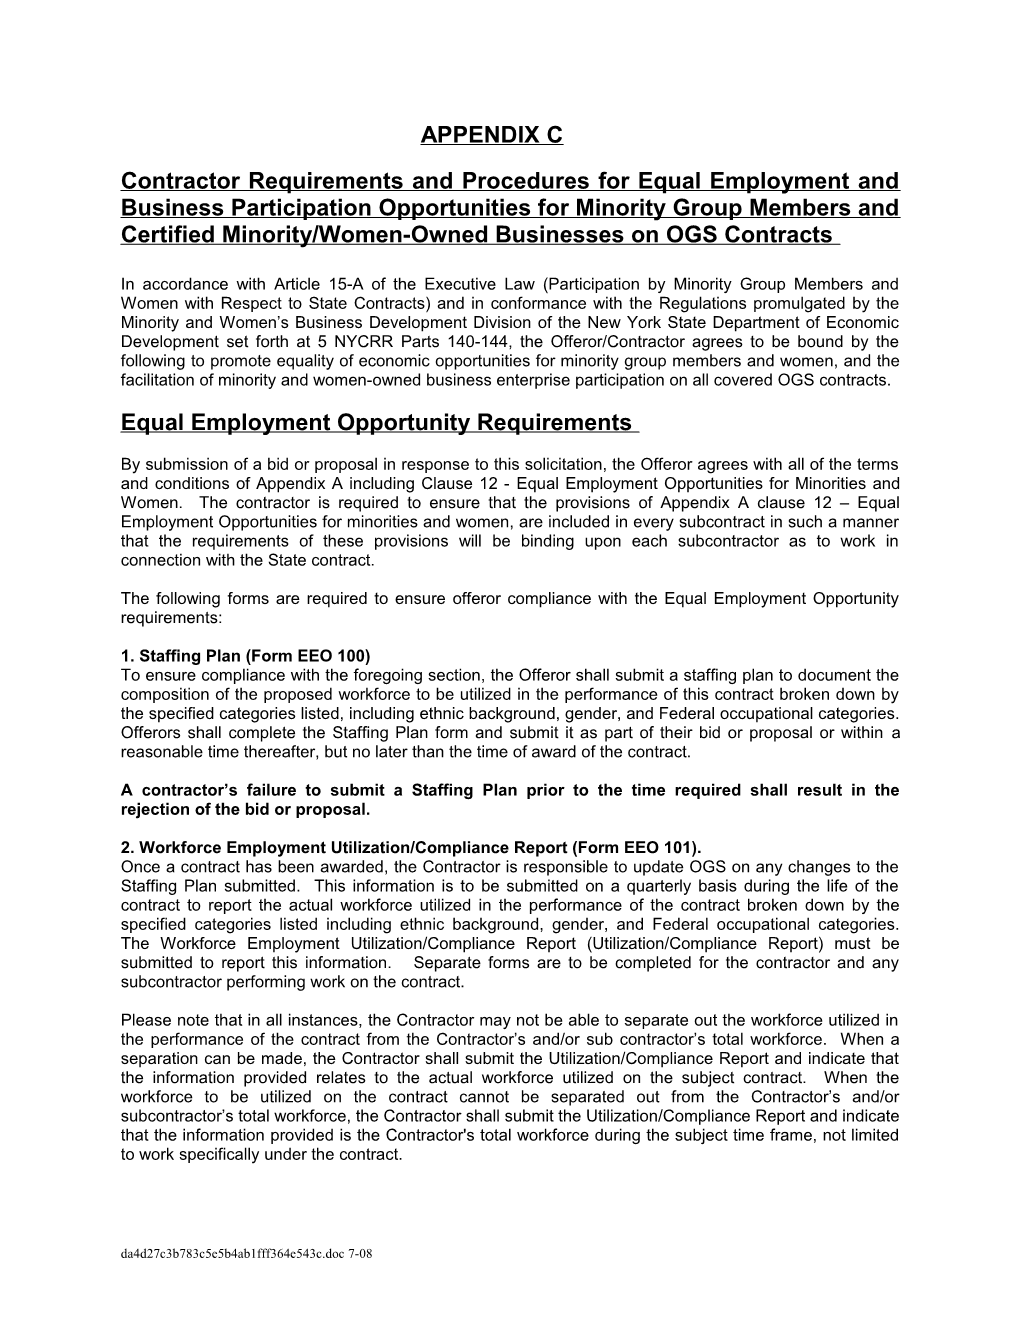 Contractor Requirements and Procedures for Equal Employment and Business Participation